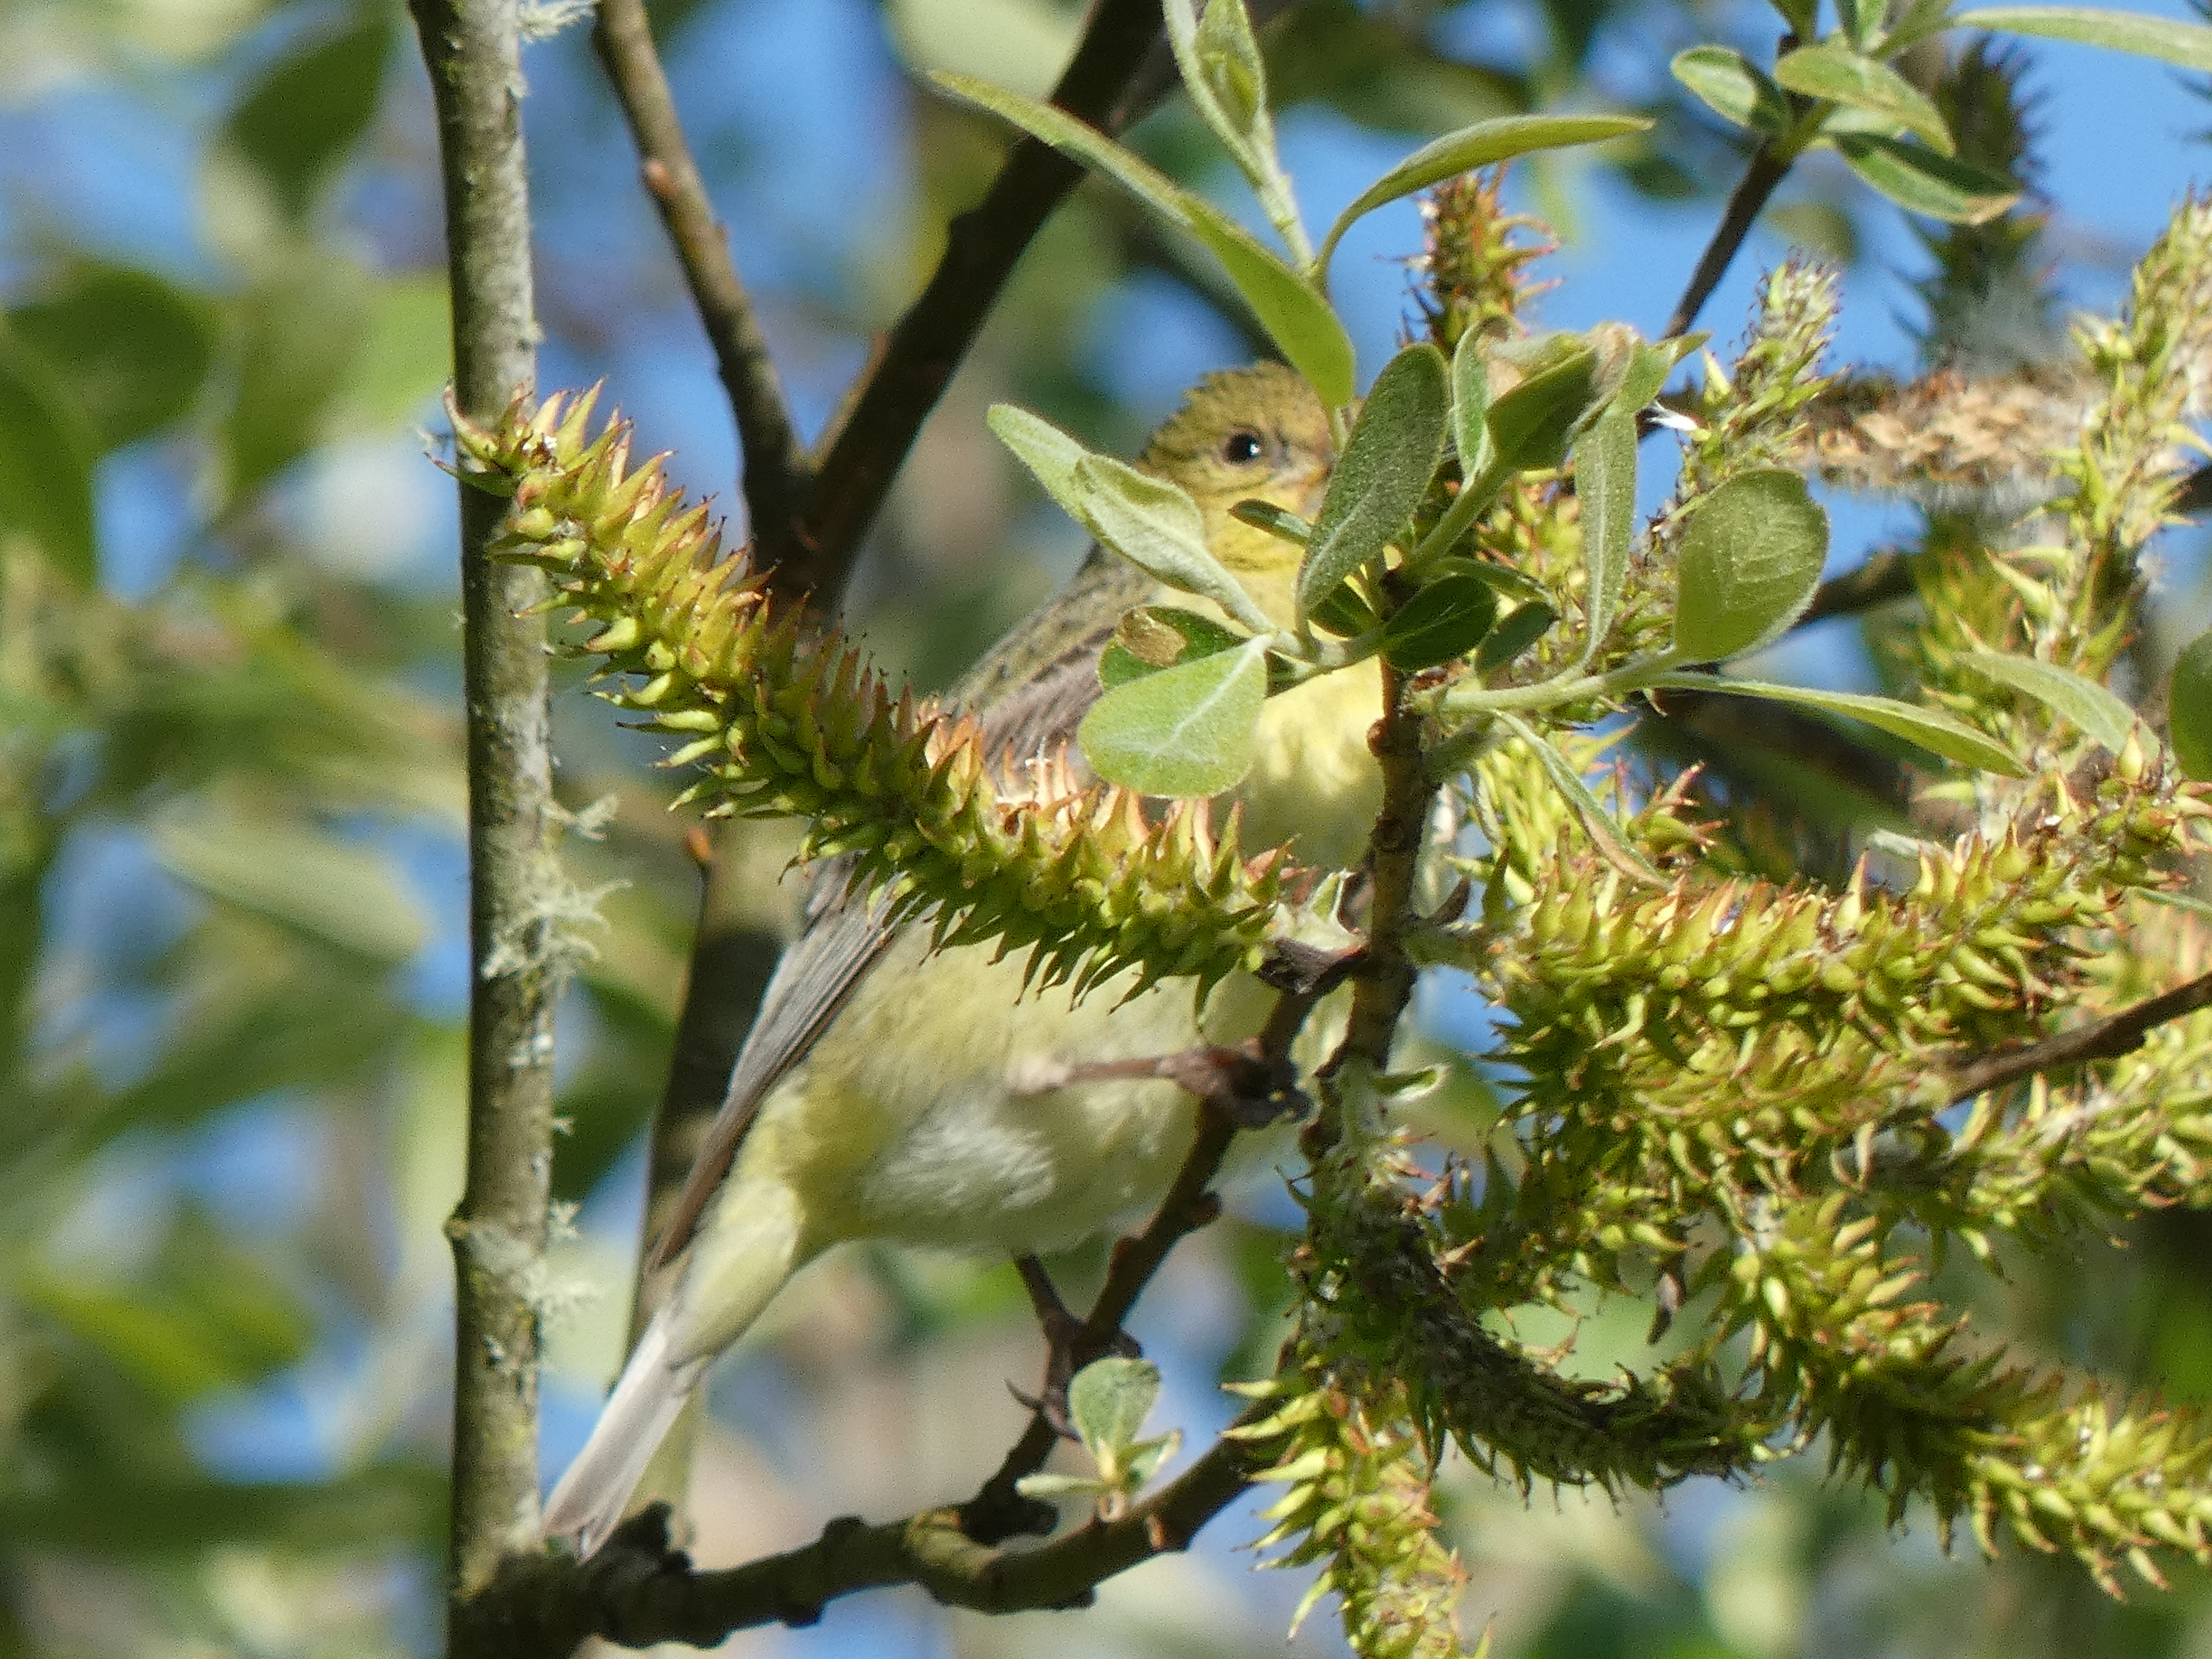 Willow female catkins